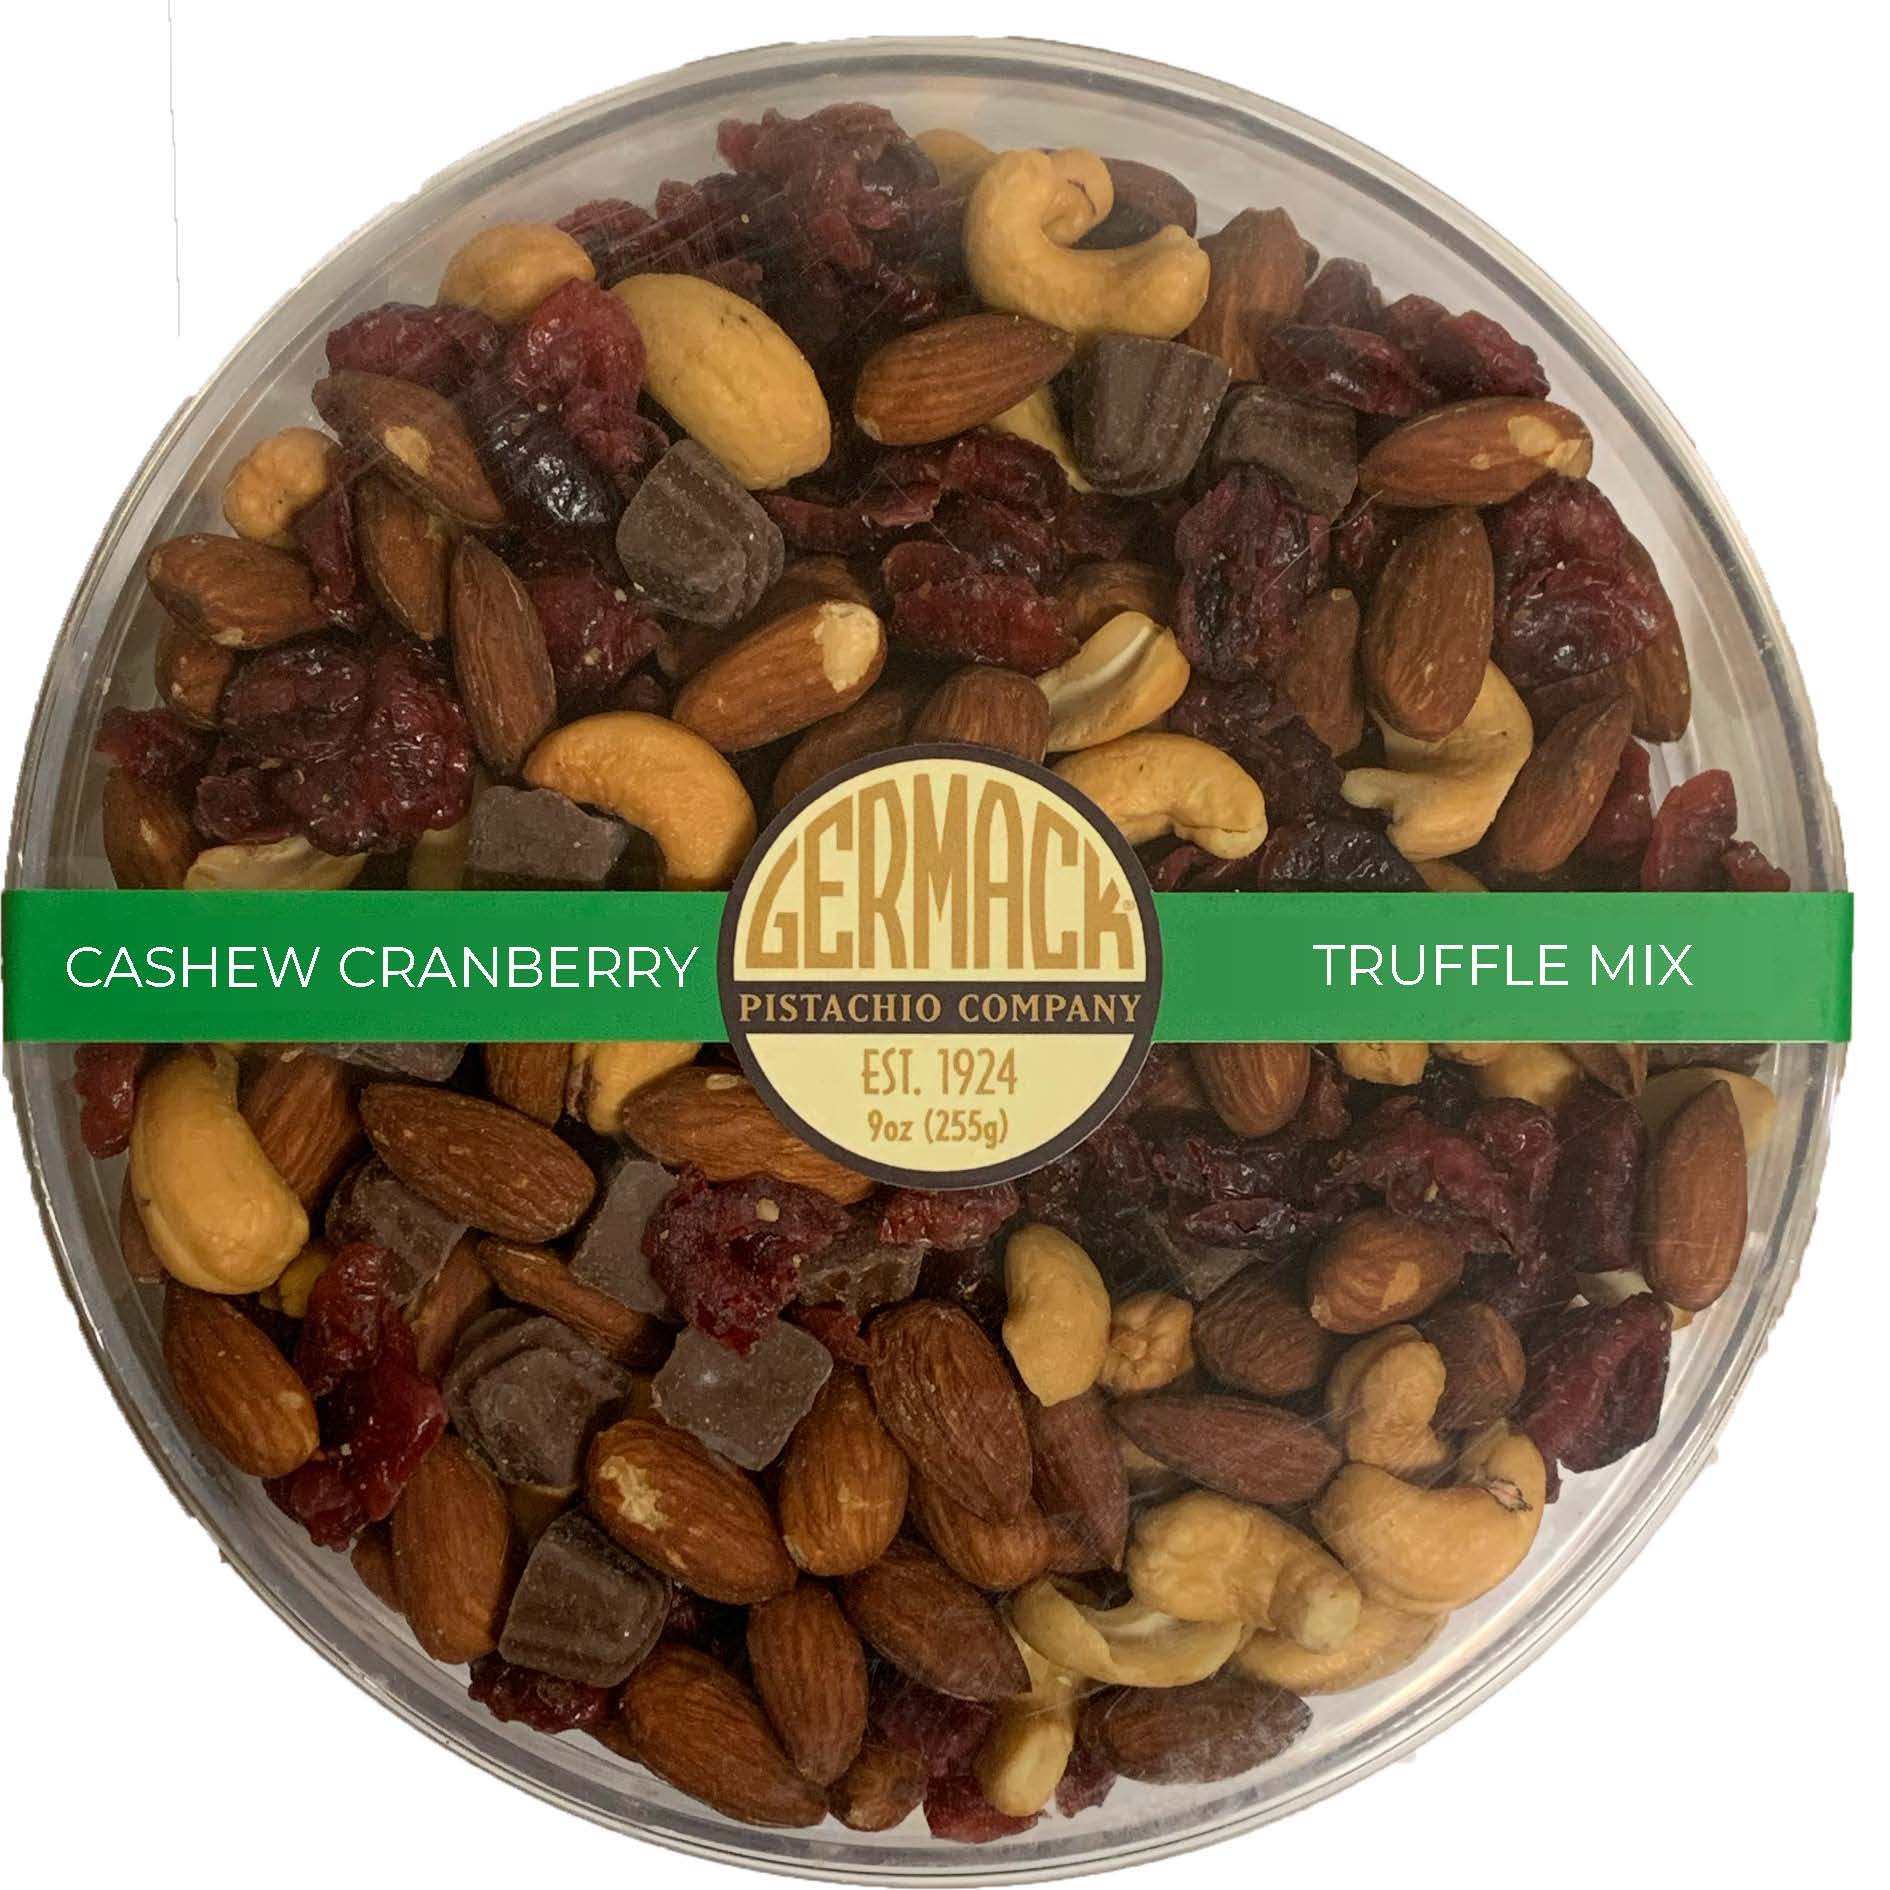 Picture Cashew Cranberry Truffle 9oz Tray 6"